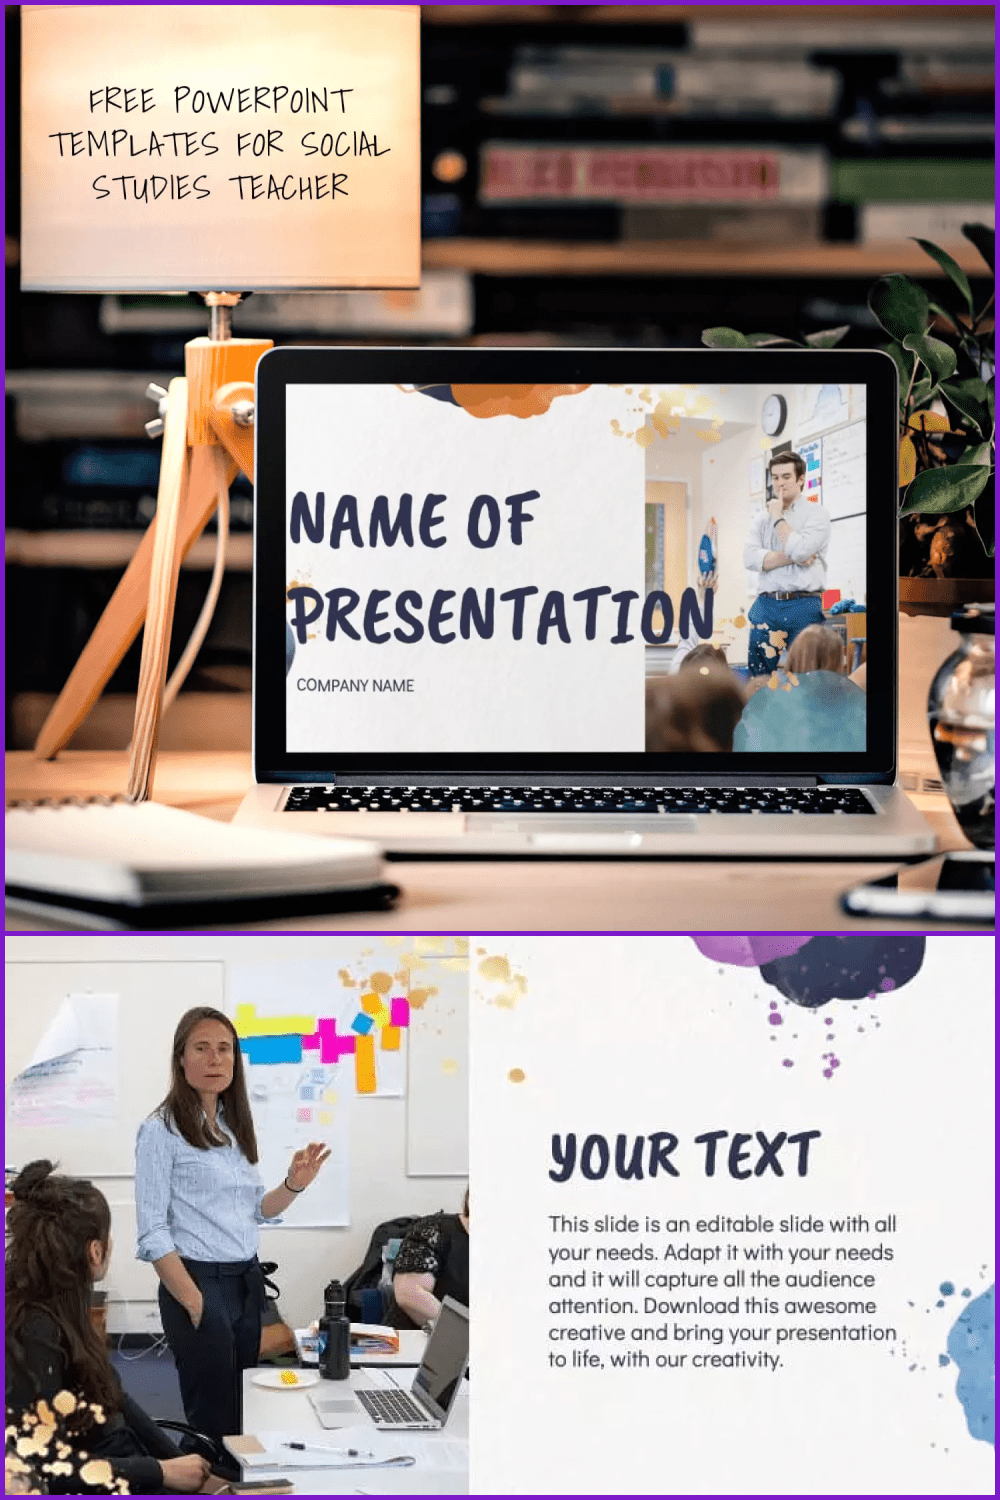 Collage of presentation pages with white backgrounds and close-ups of teachers in classrooms.